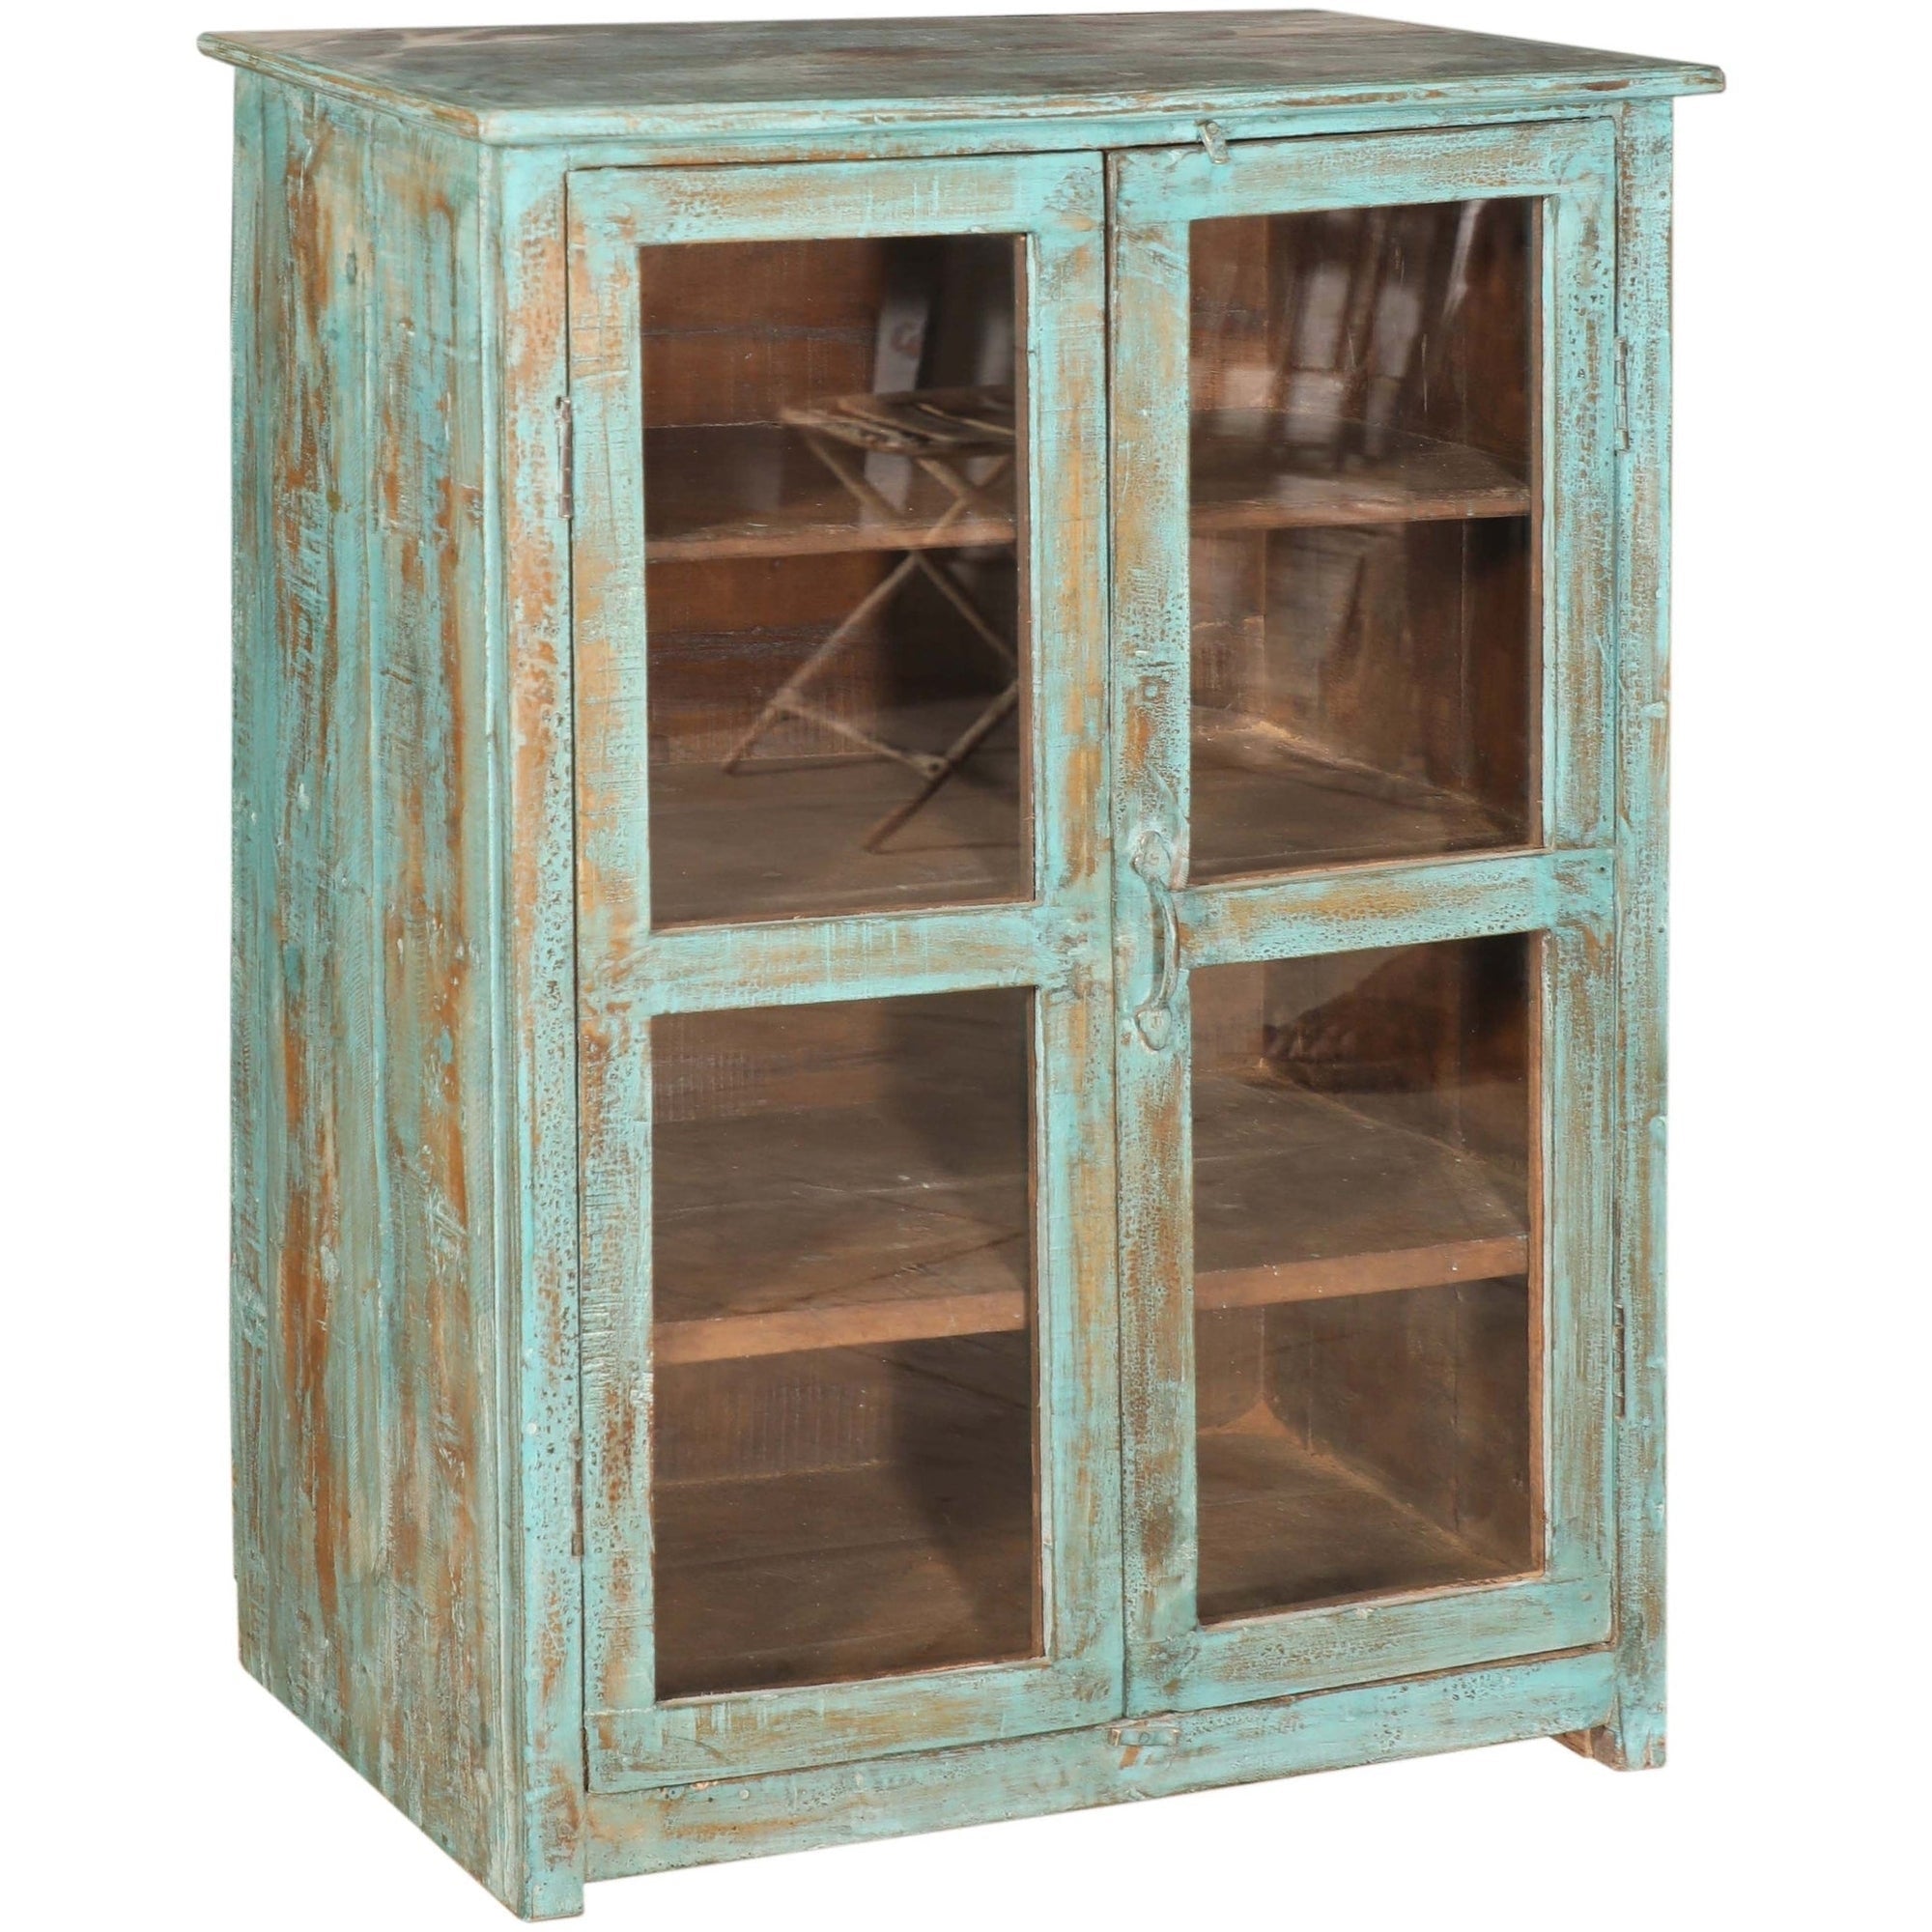 RM-060744, Wooden Cabinet With Glass, Teak, 50+Yrs Old - iDekor8